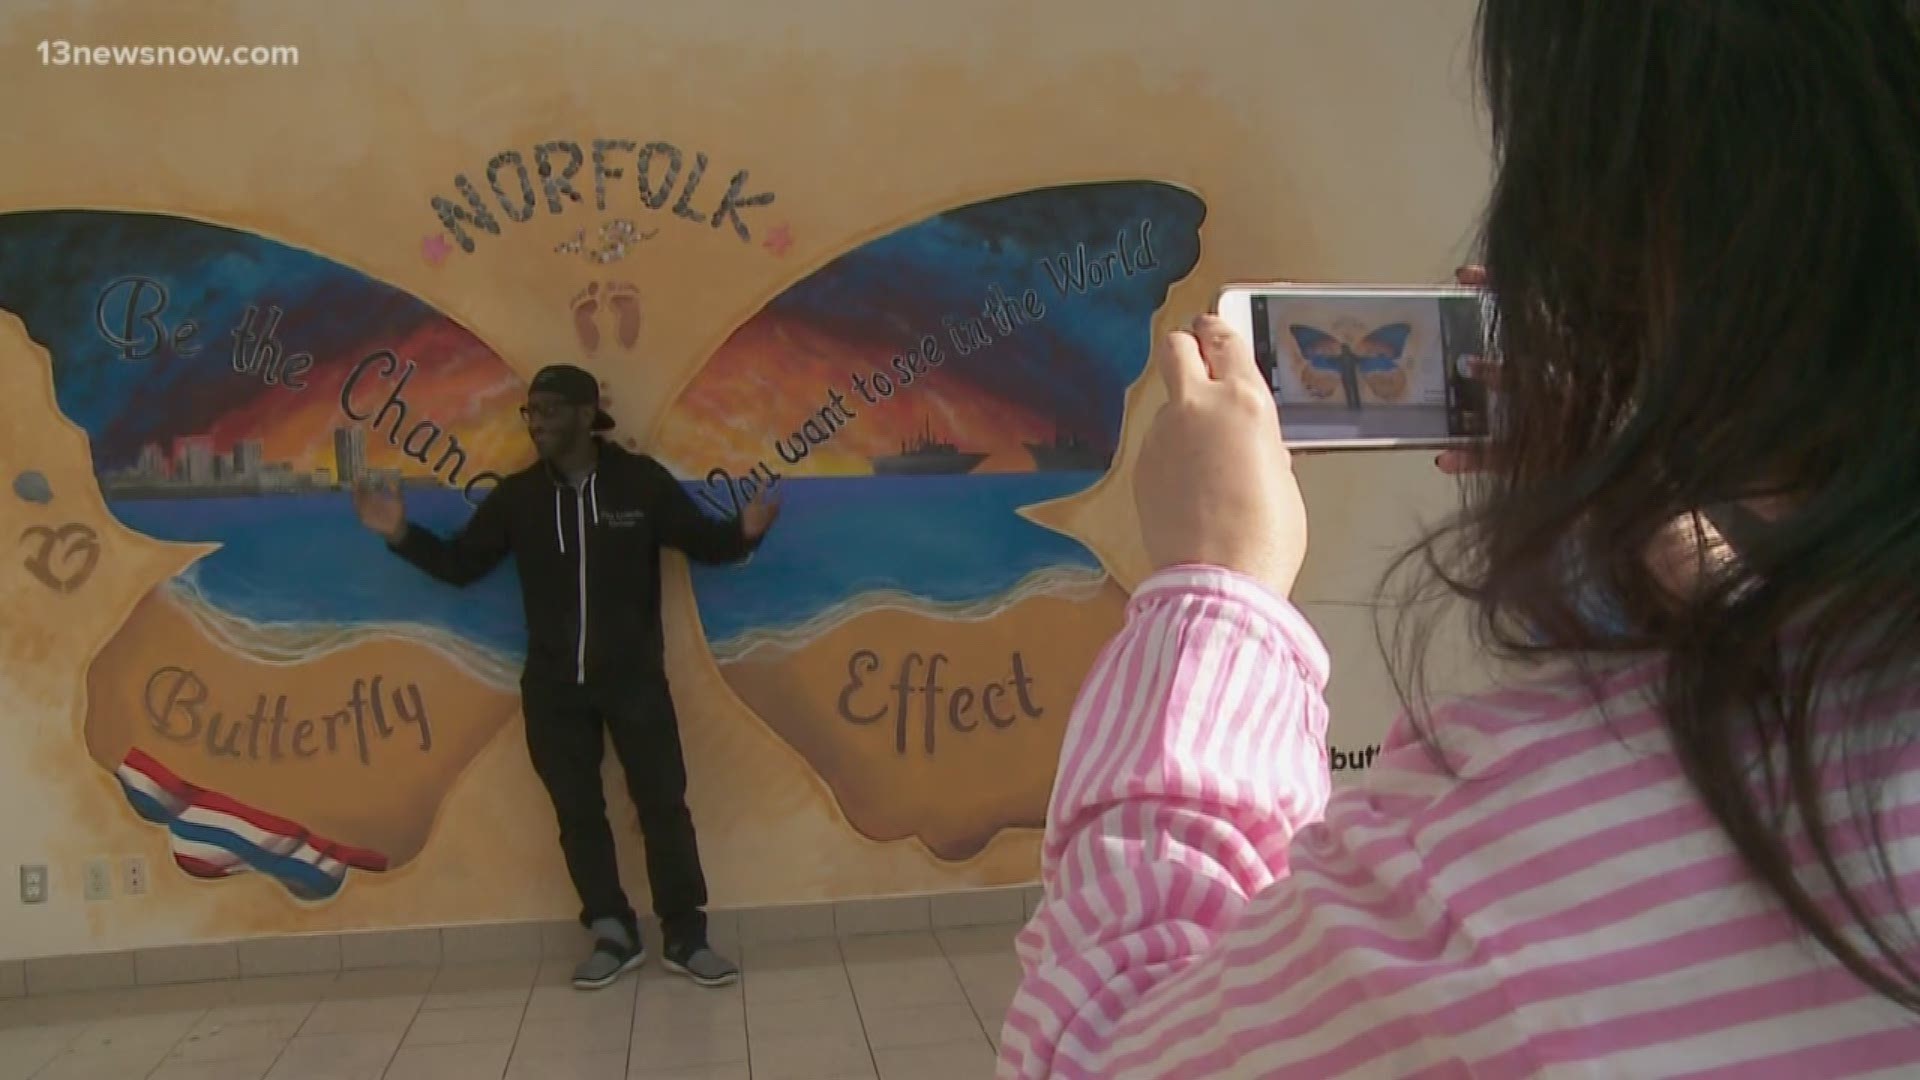 A mural at a local mall helps raise money for women's groups in Hampton Roads.